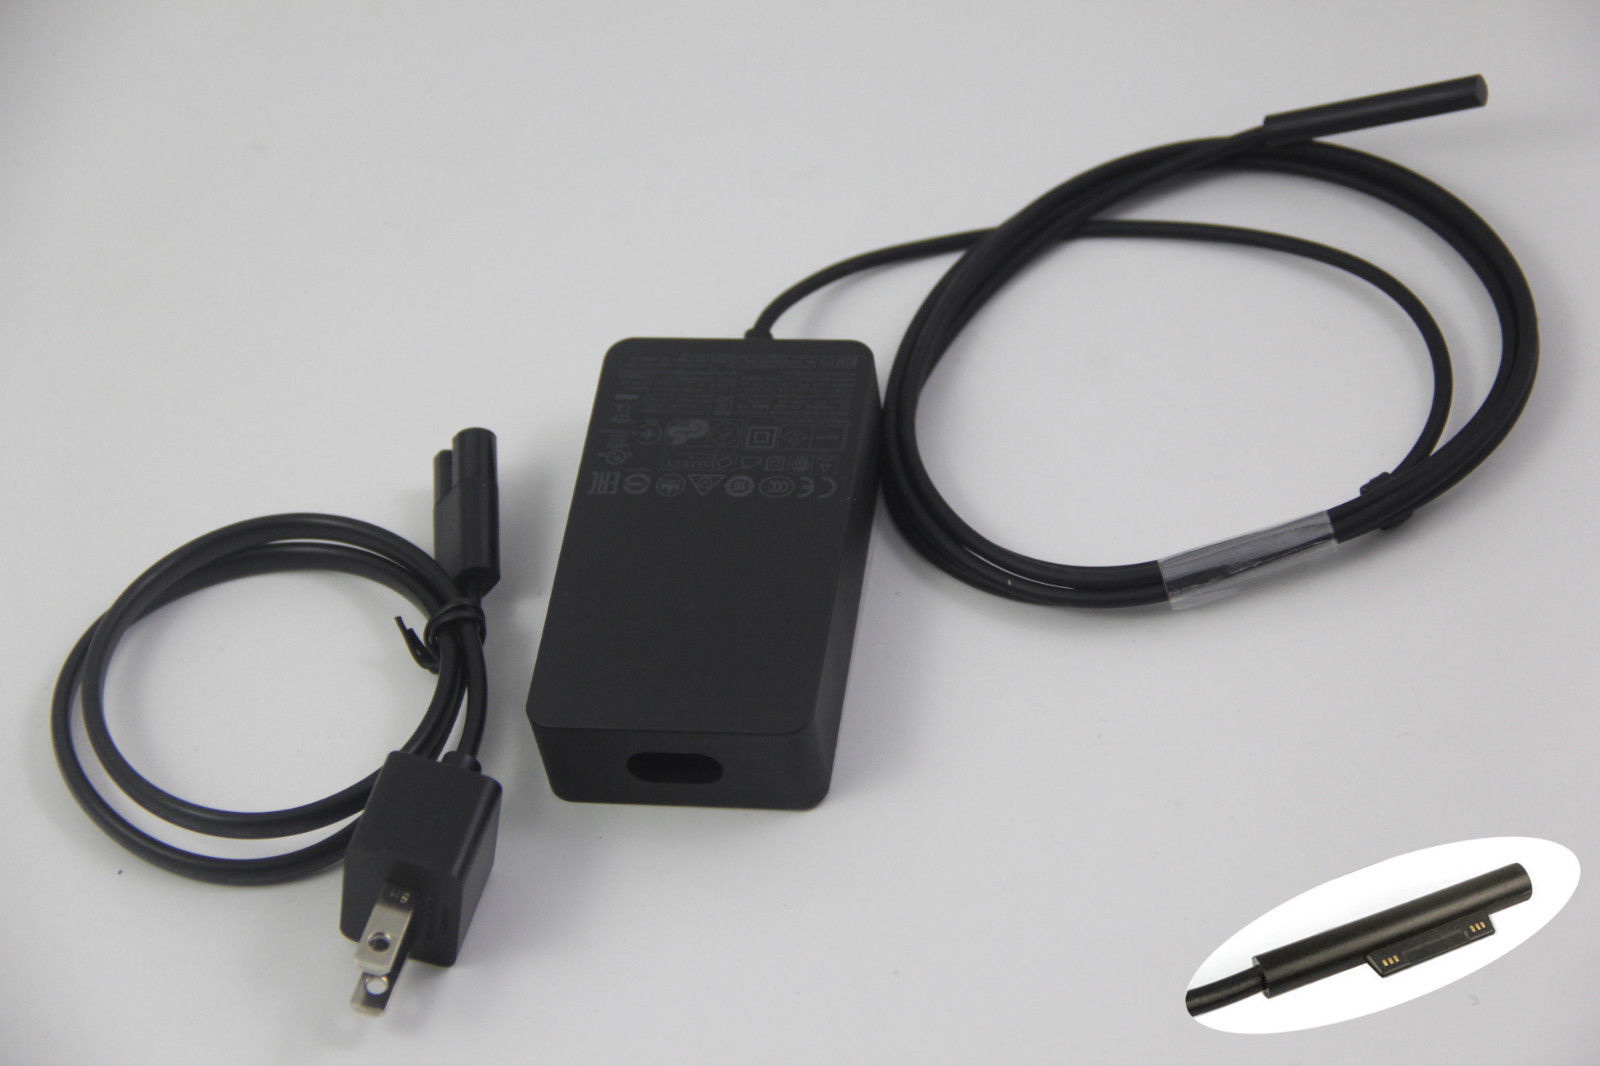 Genuine Original OEM 1625 Charger Adapter For Microsoft Surface Pro 3 Tablet PC